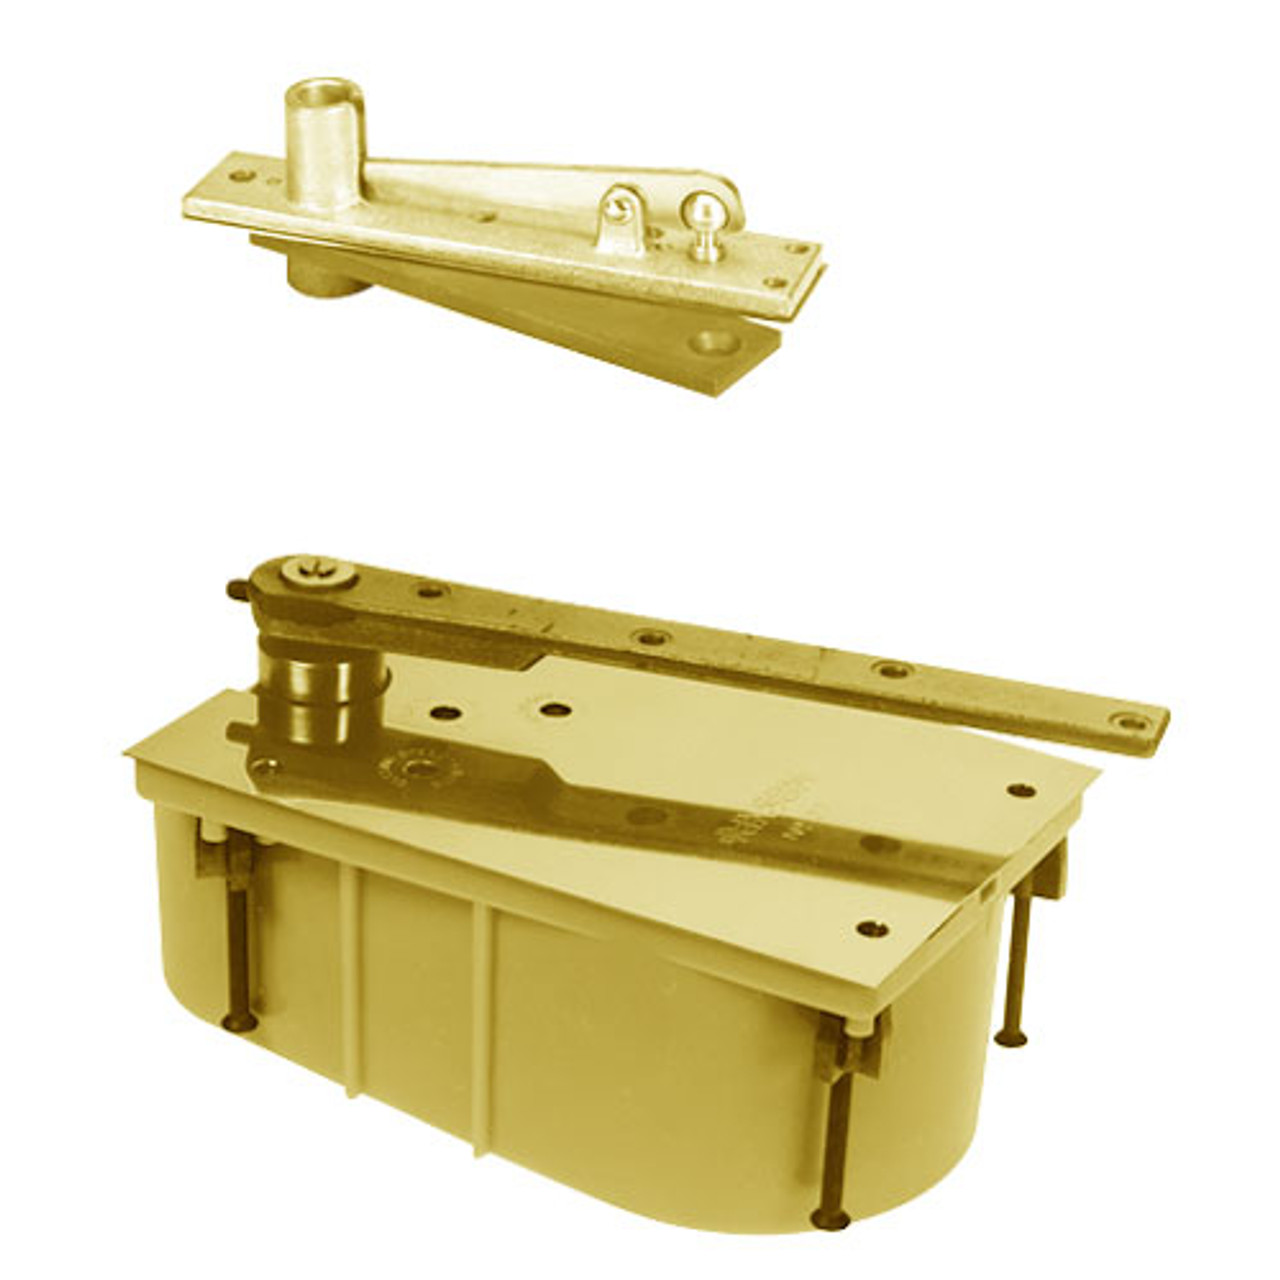 SC28-85N-554-CWF-LH-605 Rixson 28 Series Heavy Duty Single Acting Center Hung Floor Closer with Concealed Arm in Bright Brass Finish